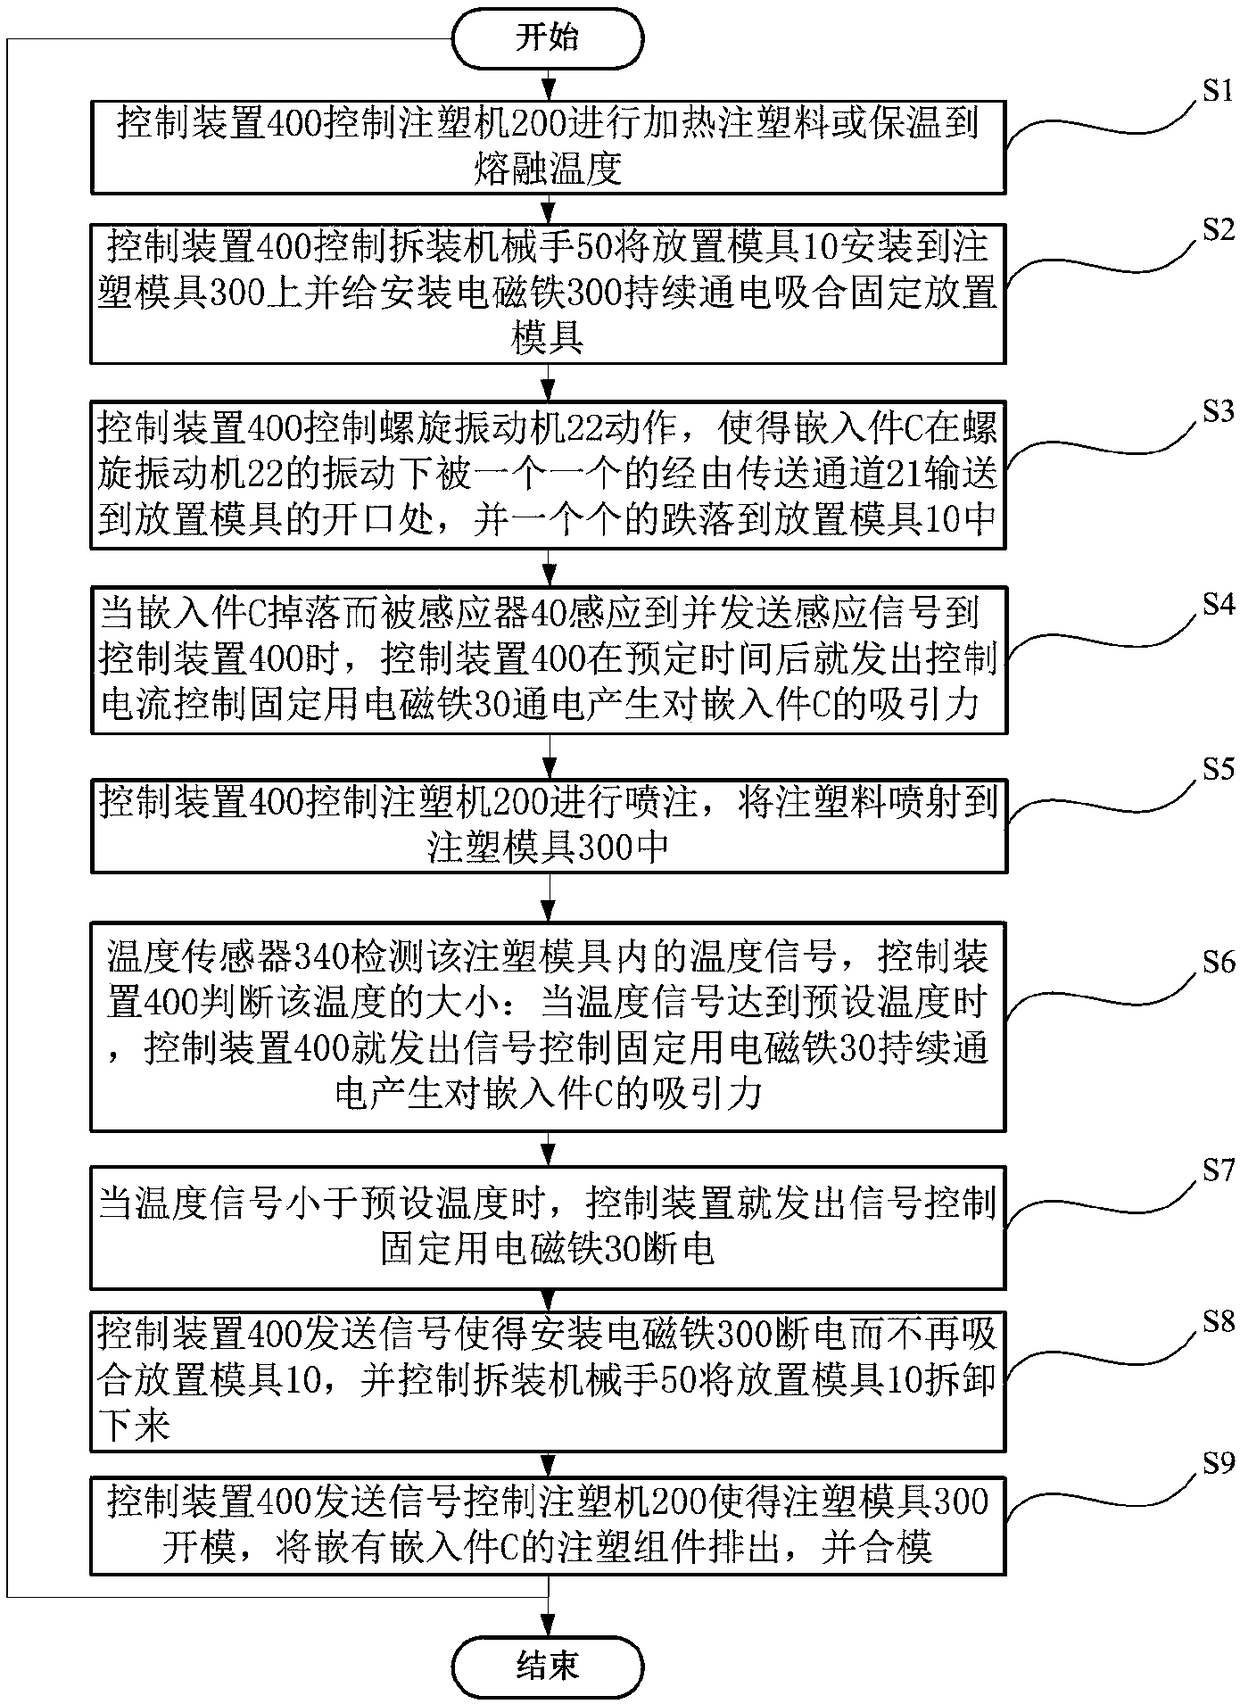 Injection-molded component manufacturing method